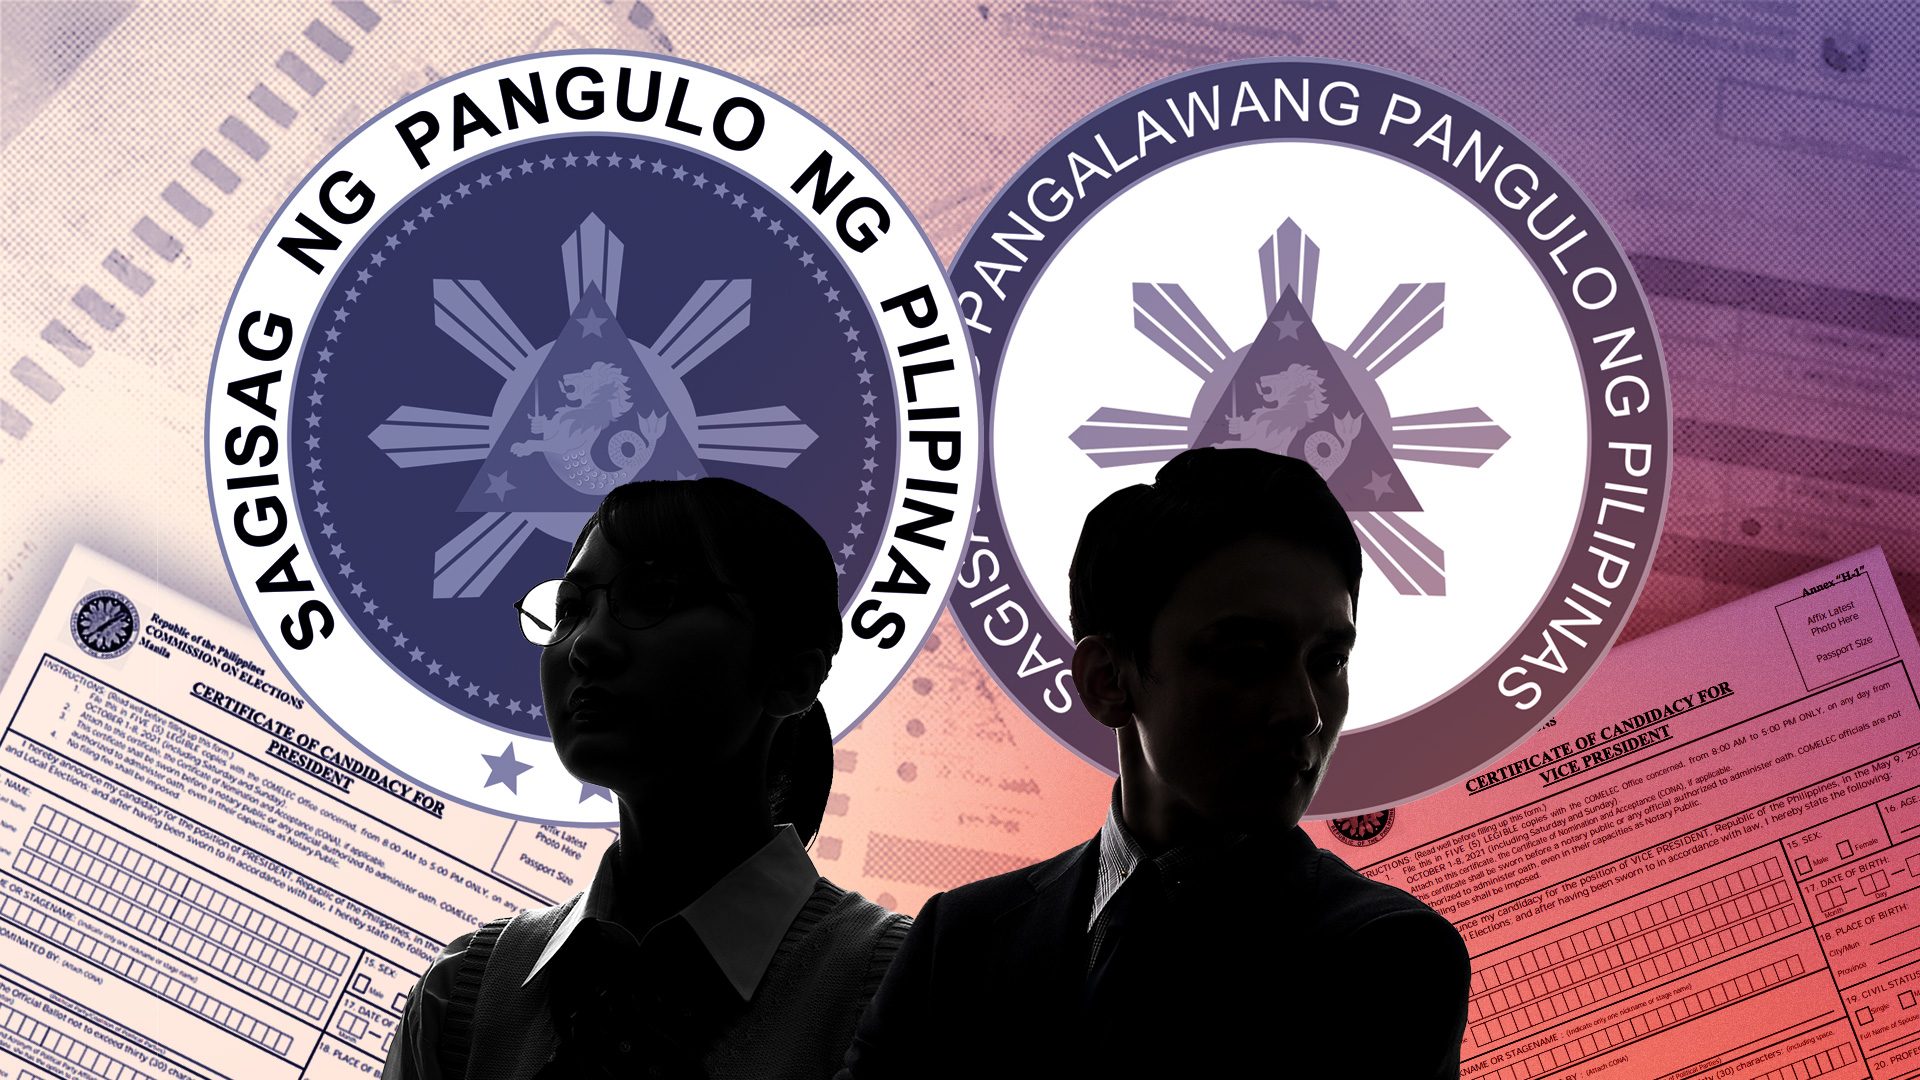 LIST: Who is running for president, vice president in the 2022 Philippine elections?